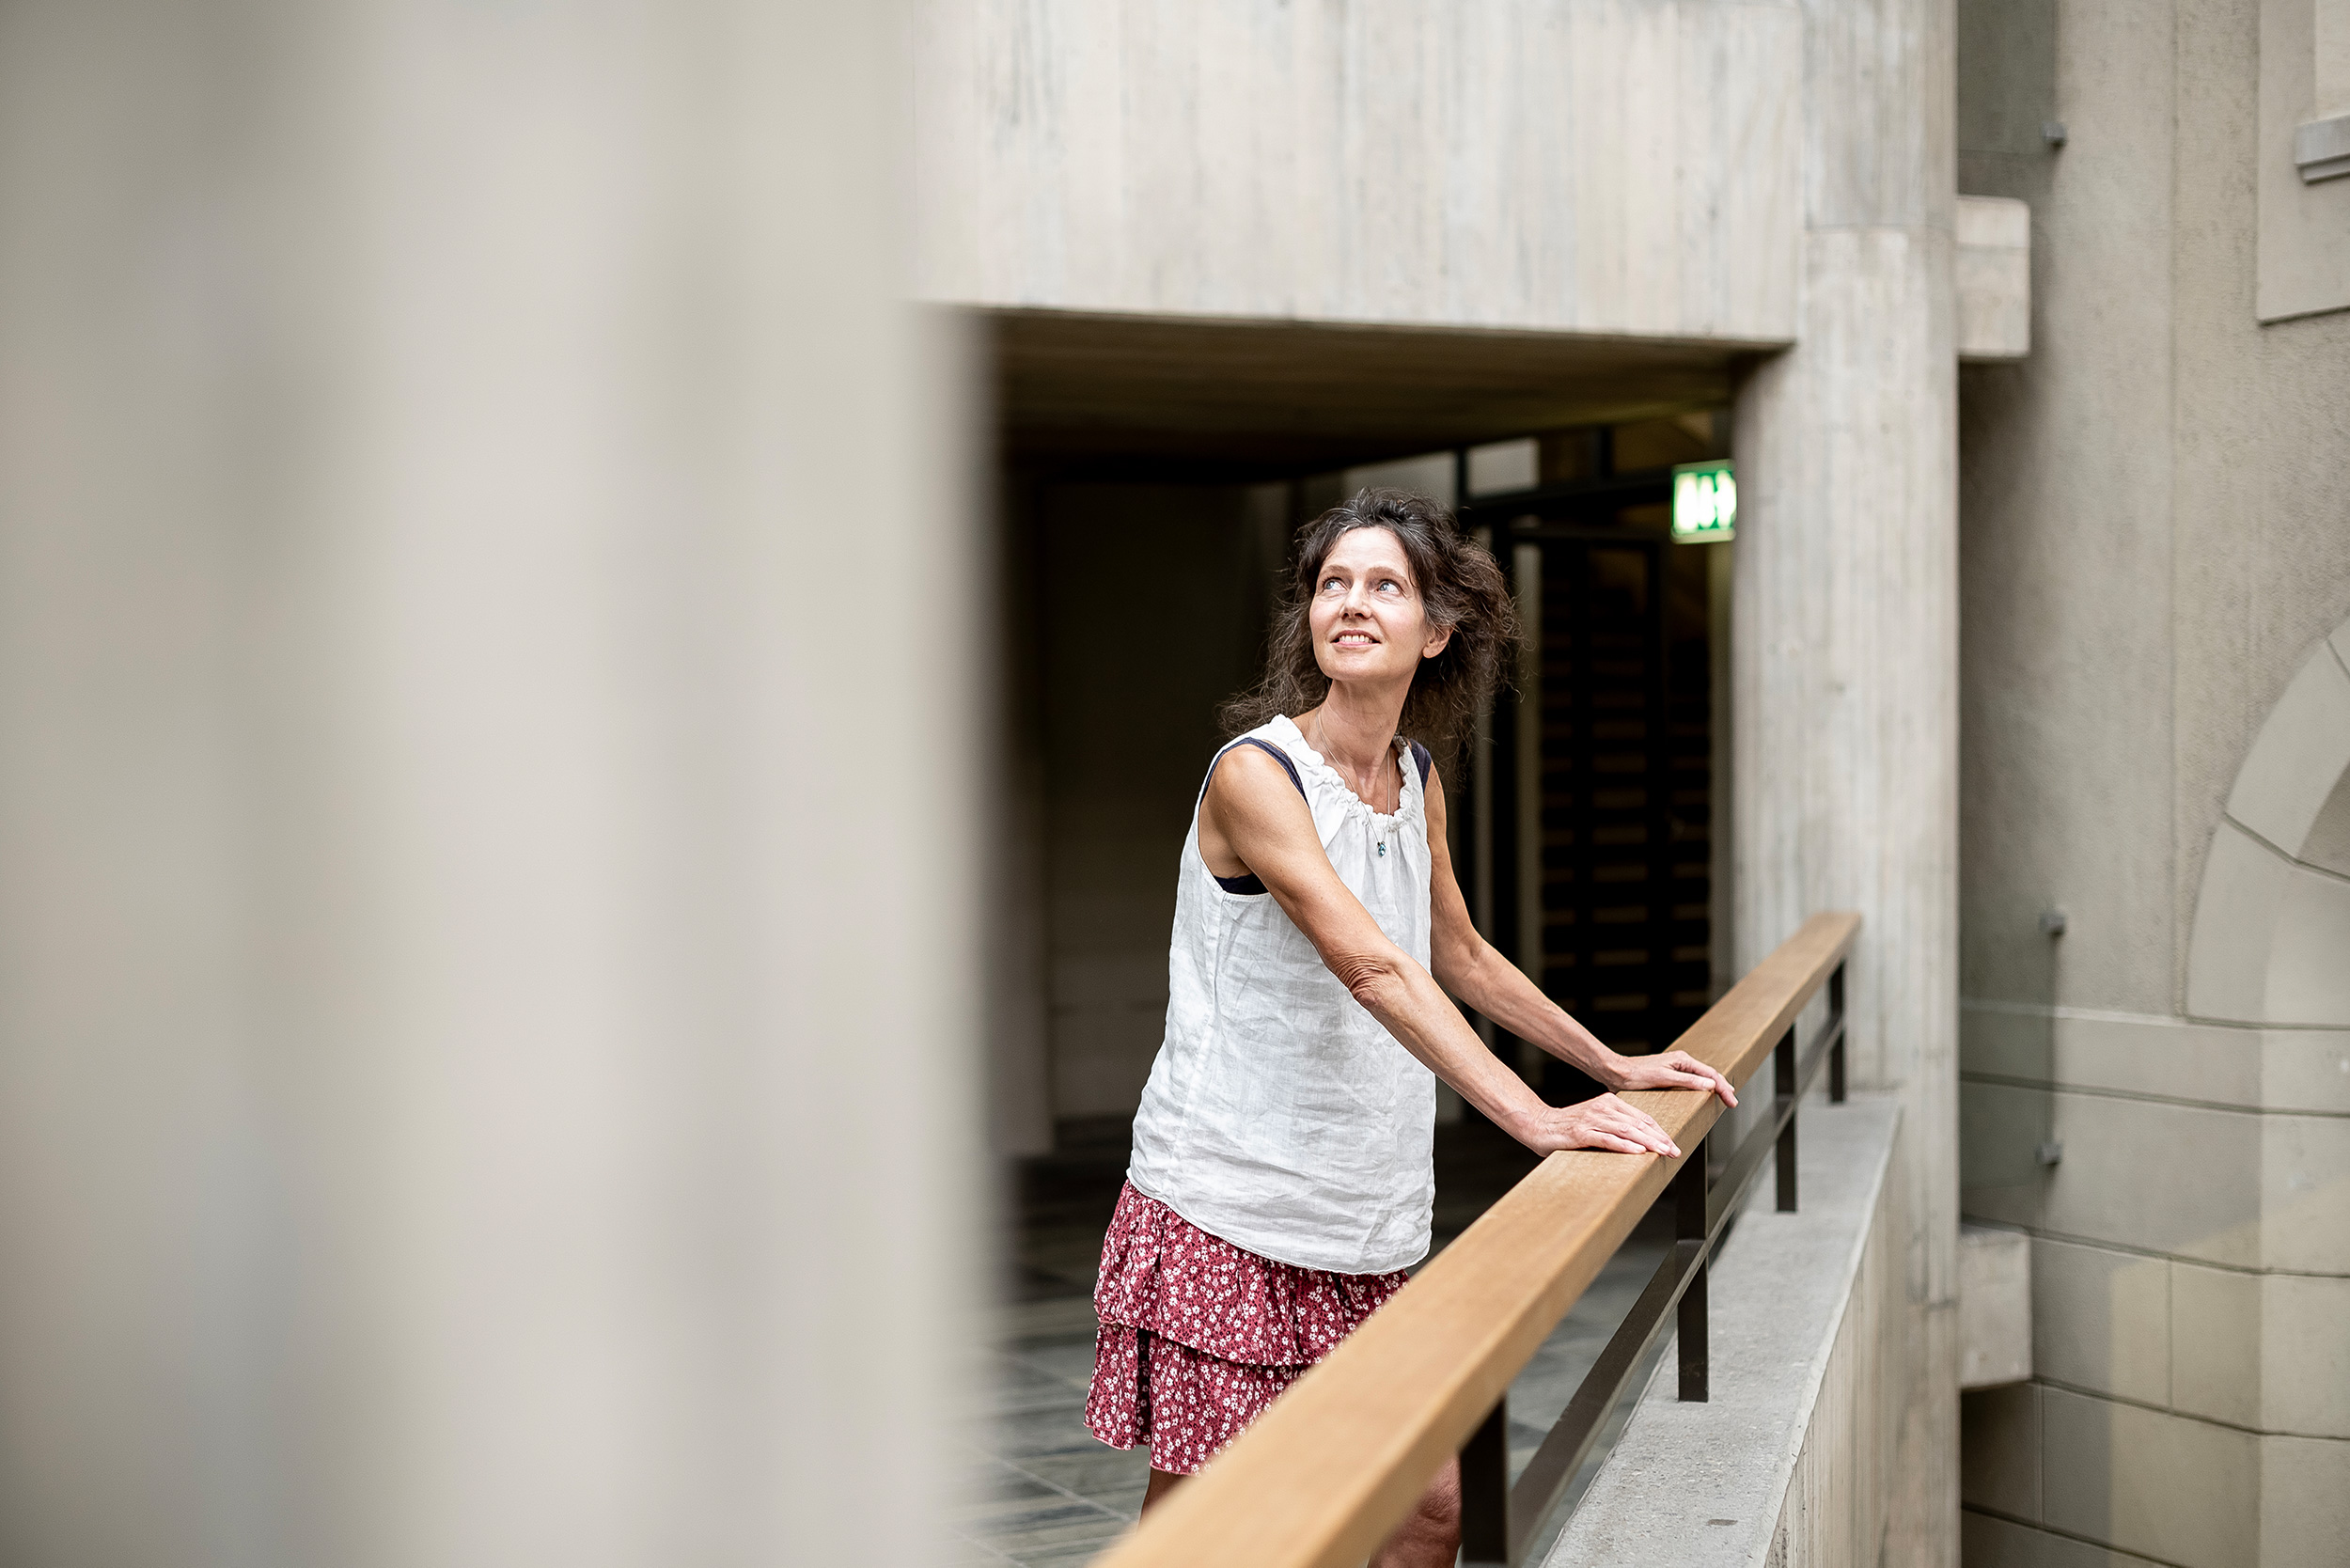 Sara van der Geer in the ETH Zentrum building, leaning on the railing and looking up at the ceiling with a smile.